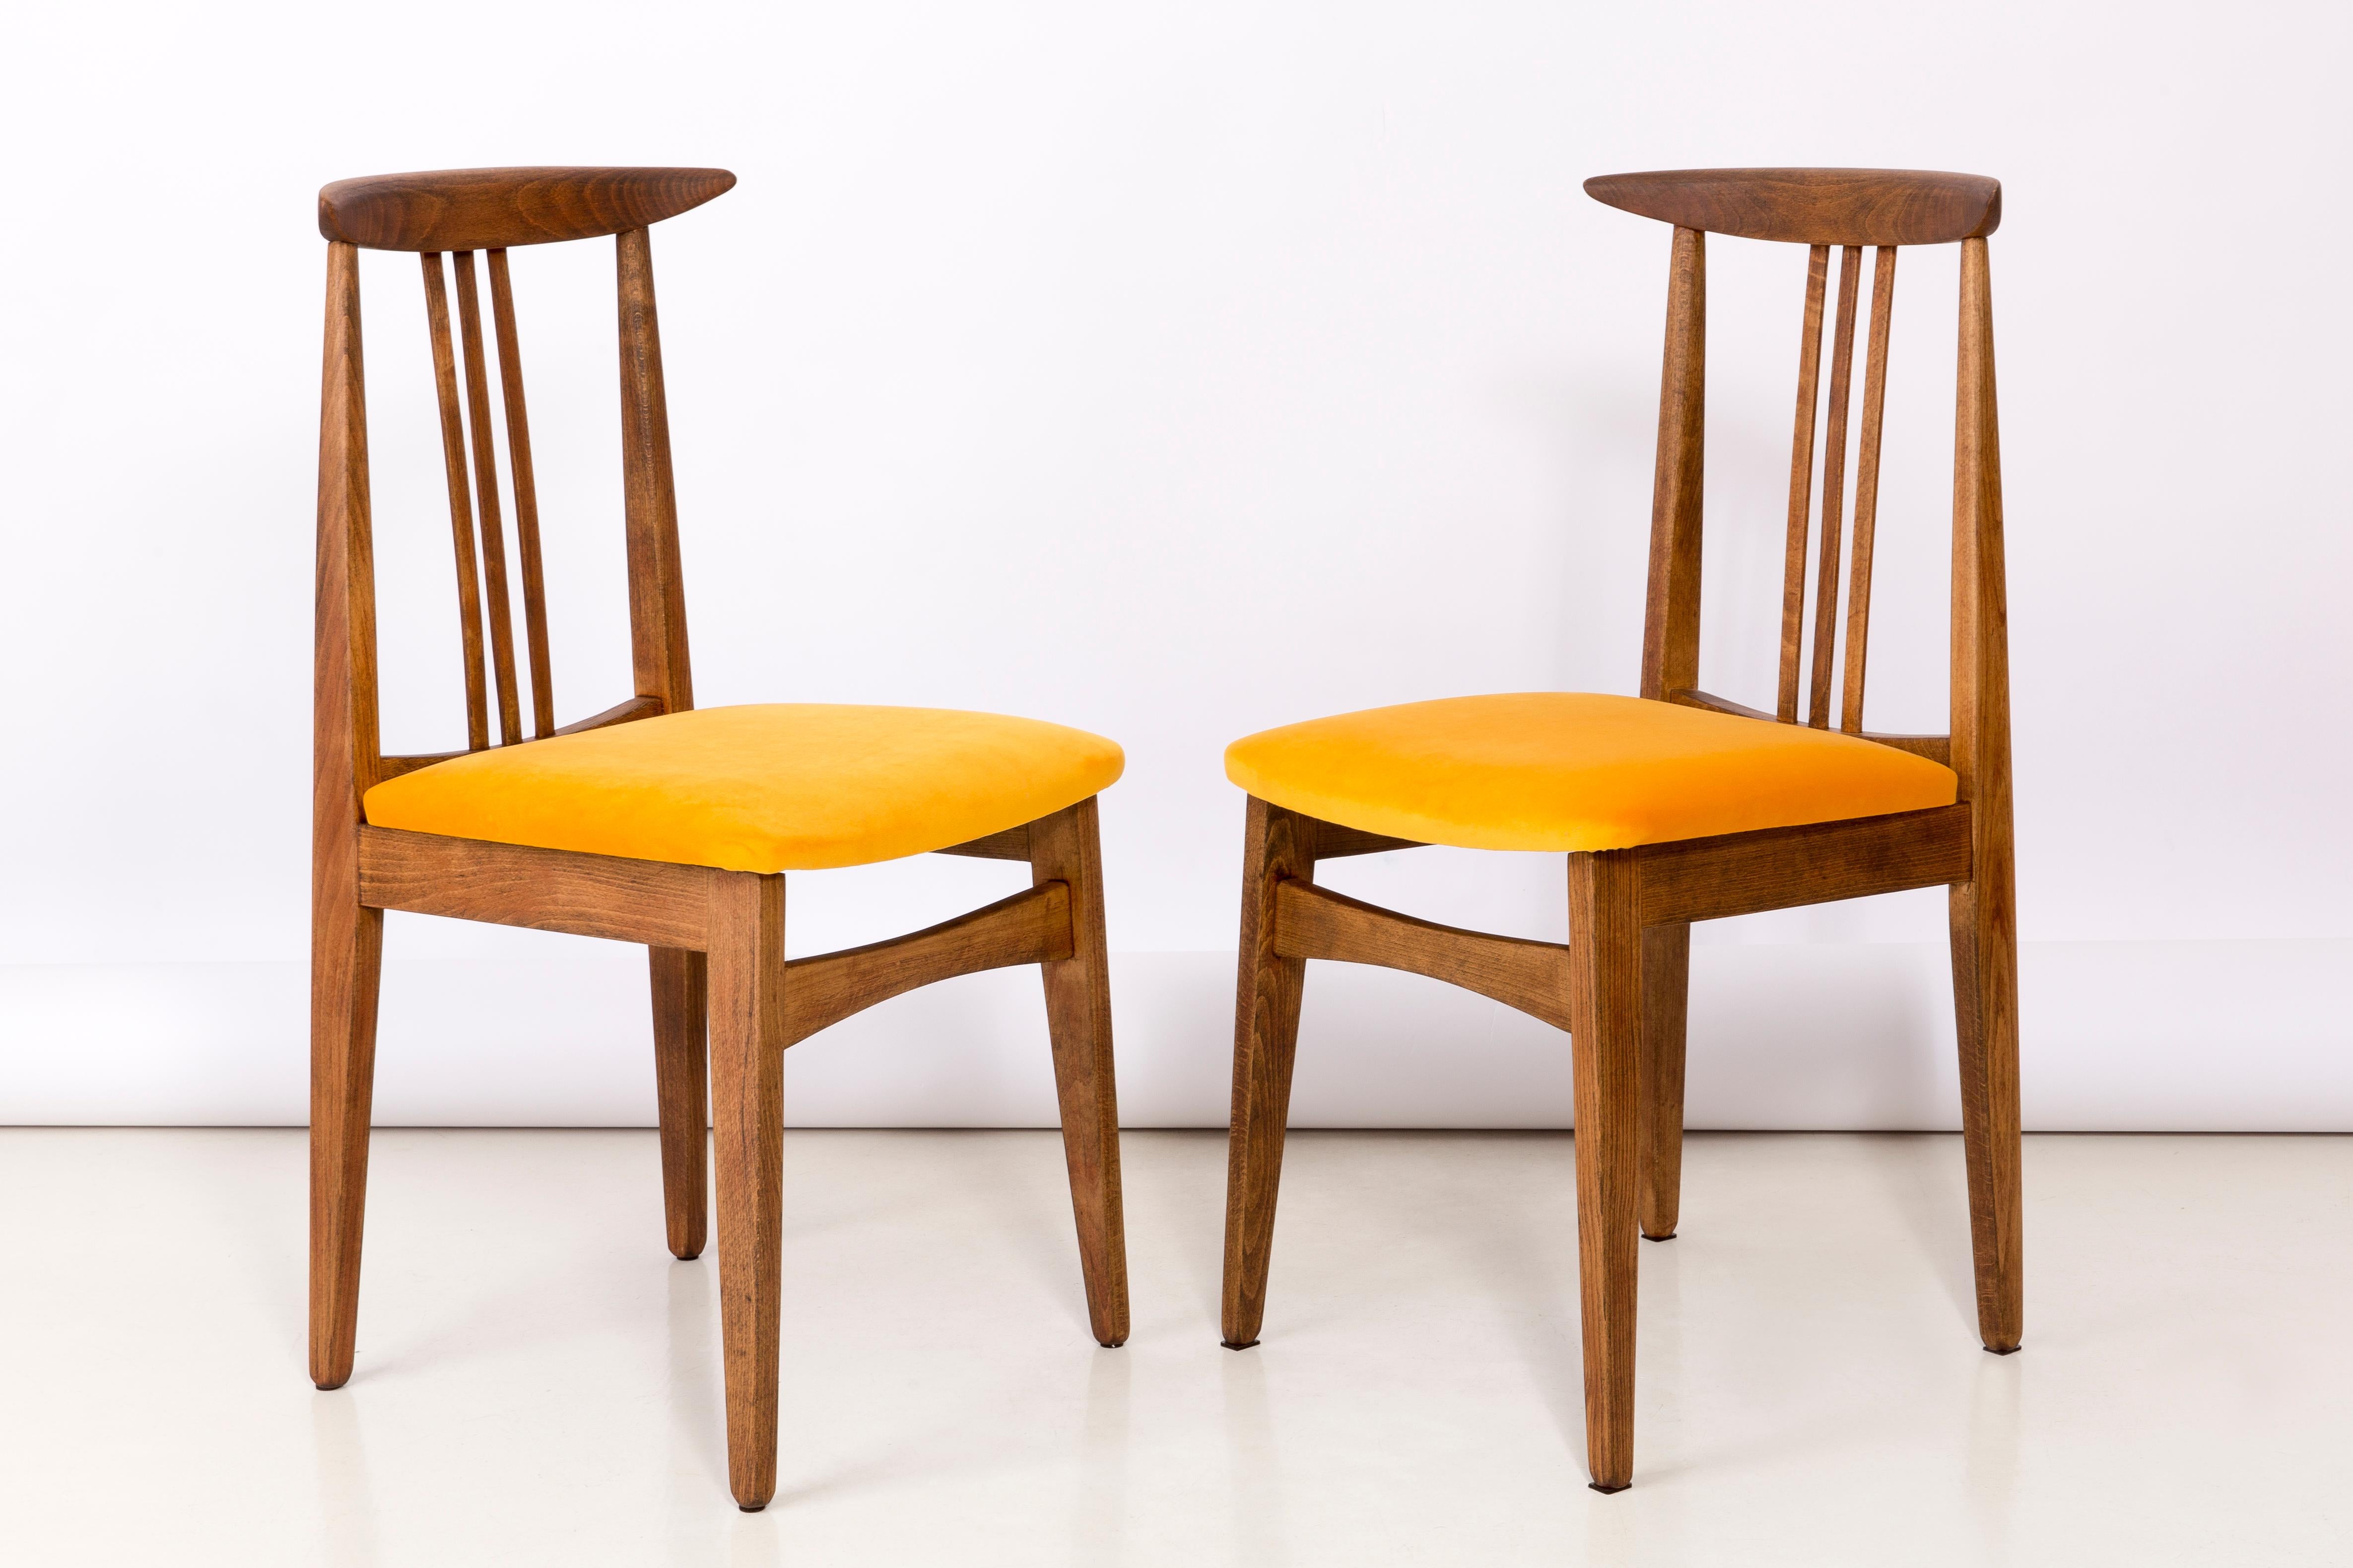 Polish Set of Four Yellow Chairs, by Zielinski, Poland, 1960s For Sale